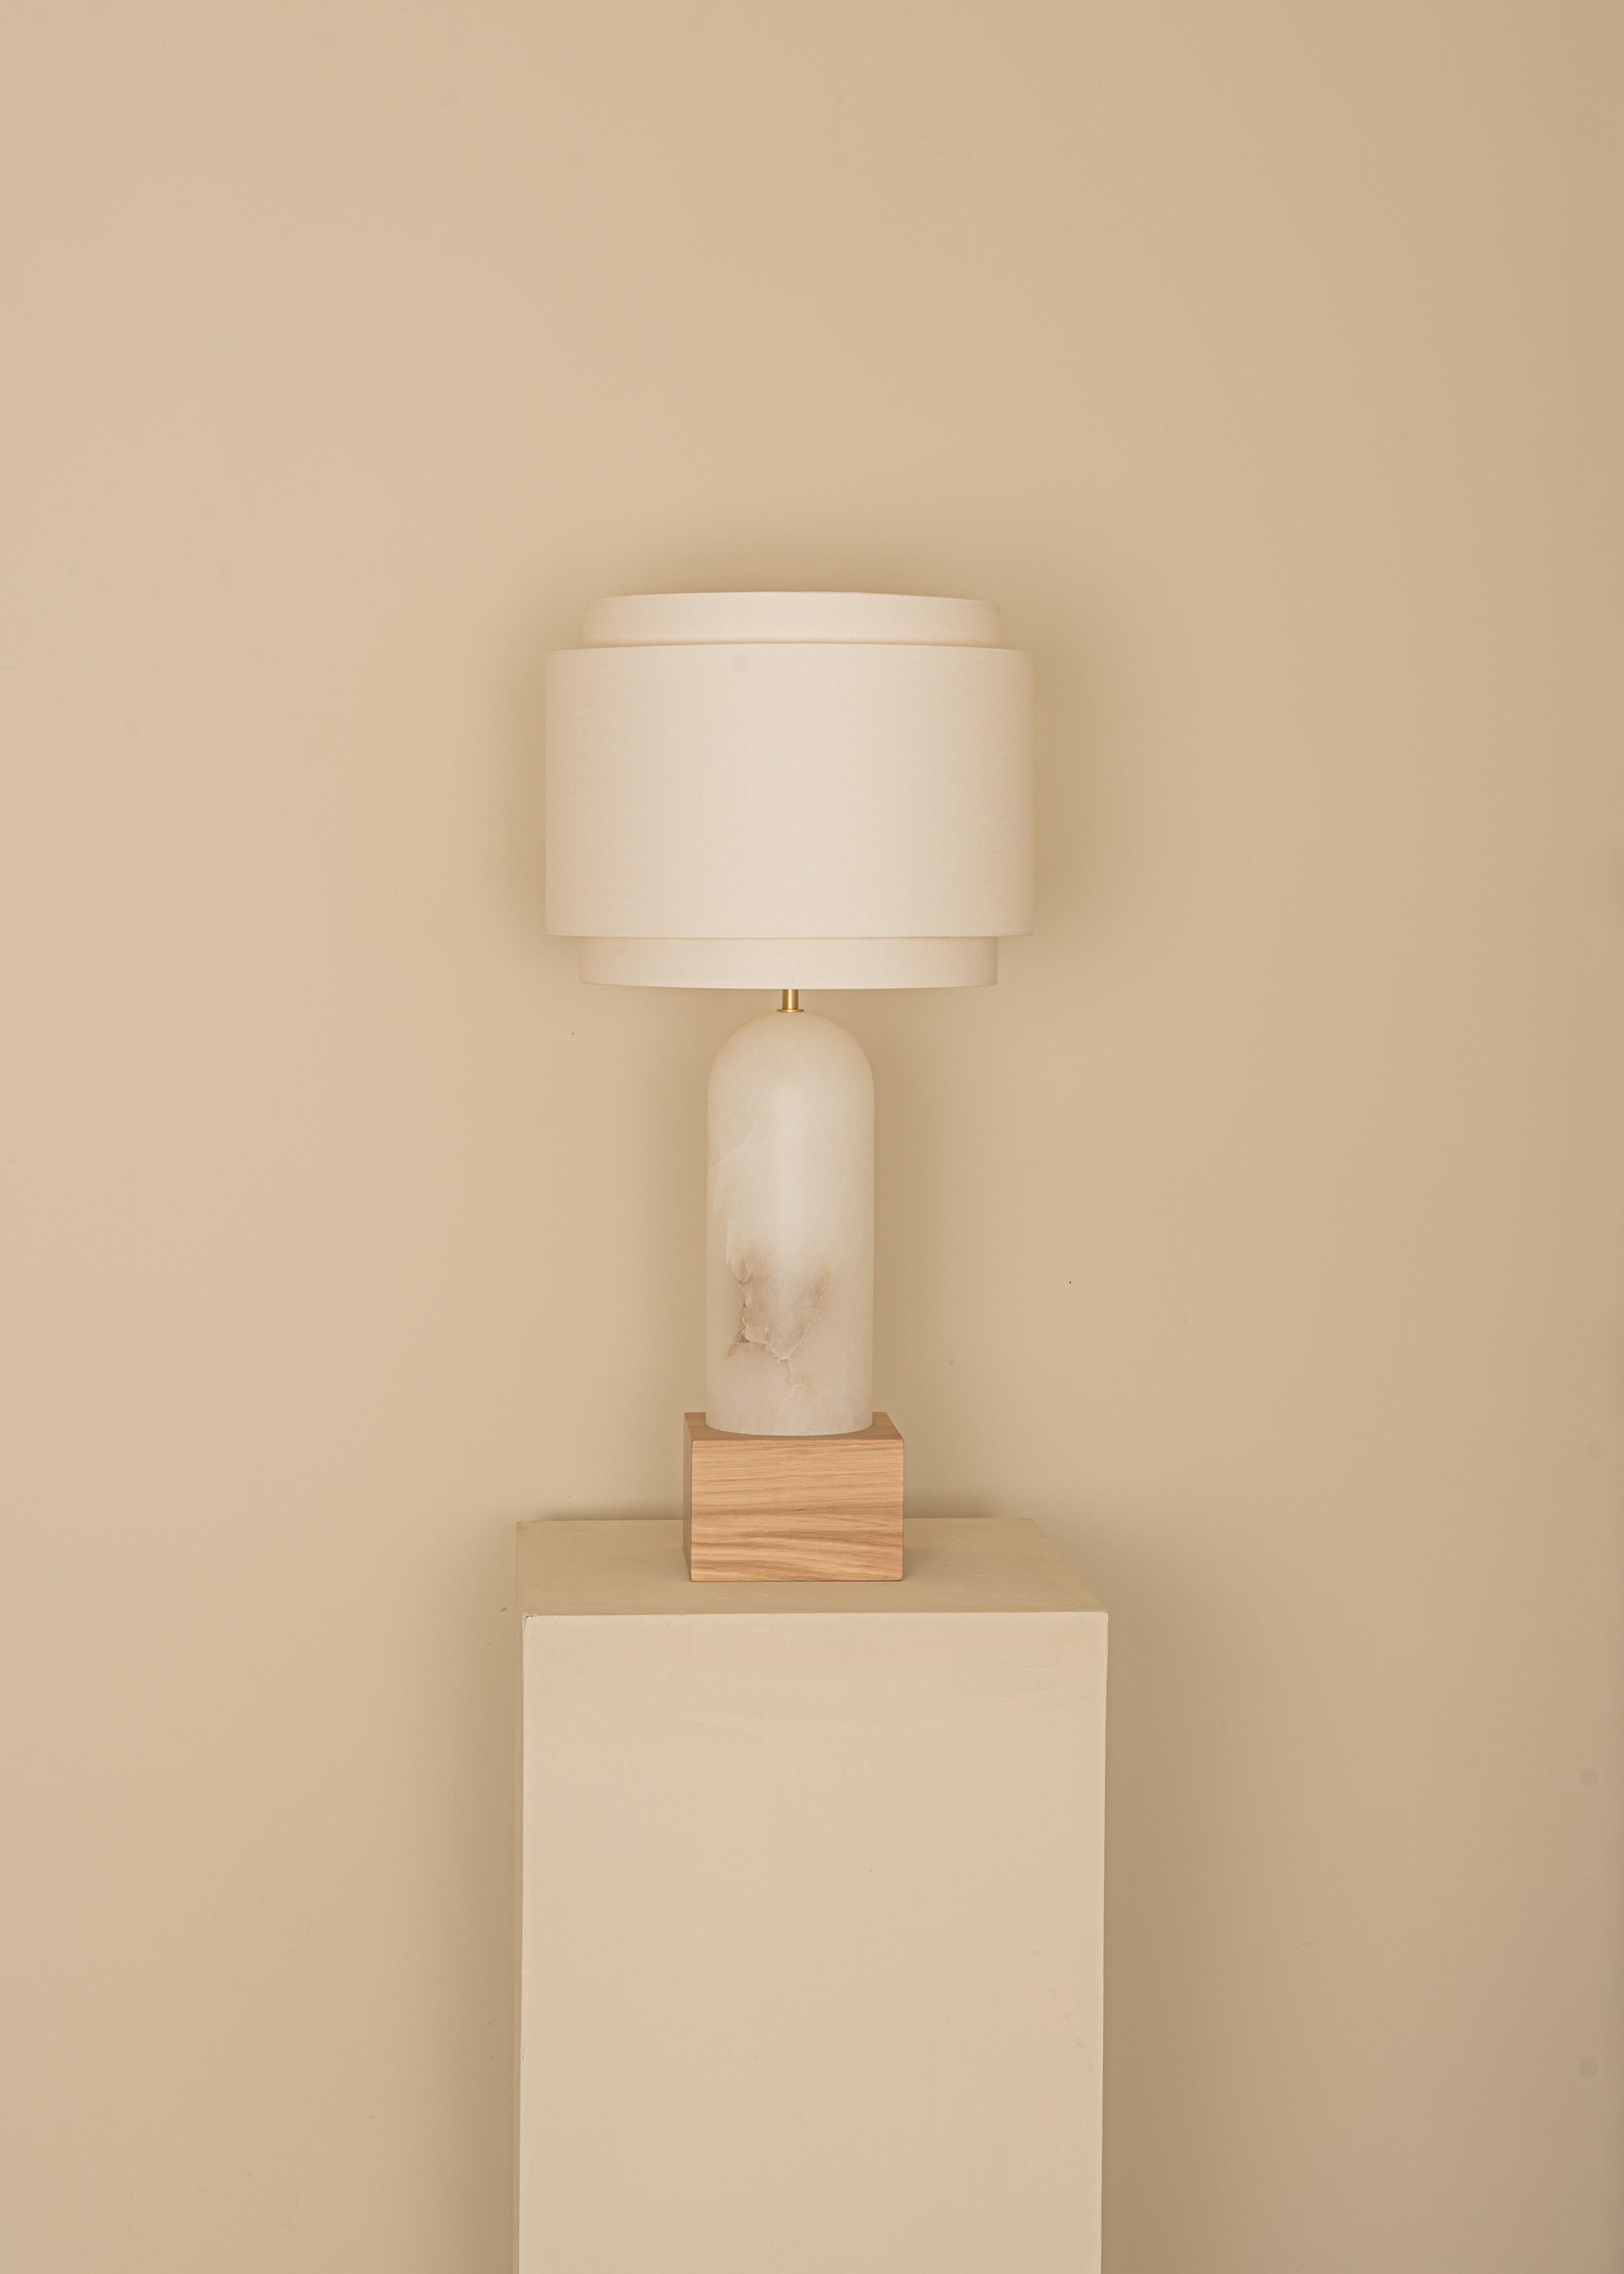 White Alabaster And Oak Base Pura Kelo Double Table Lamp by Simone & Marcel
Dimensions: D 35 x W 35 x H 69 cm.
Materials: Brass, cotton, oak and white alabaster.

Also available in different marble, wood and alabaster options and finishes. Custom